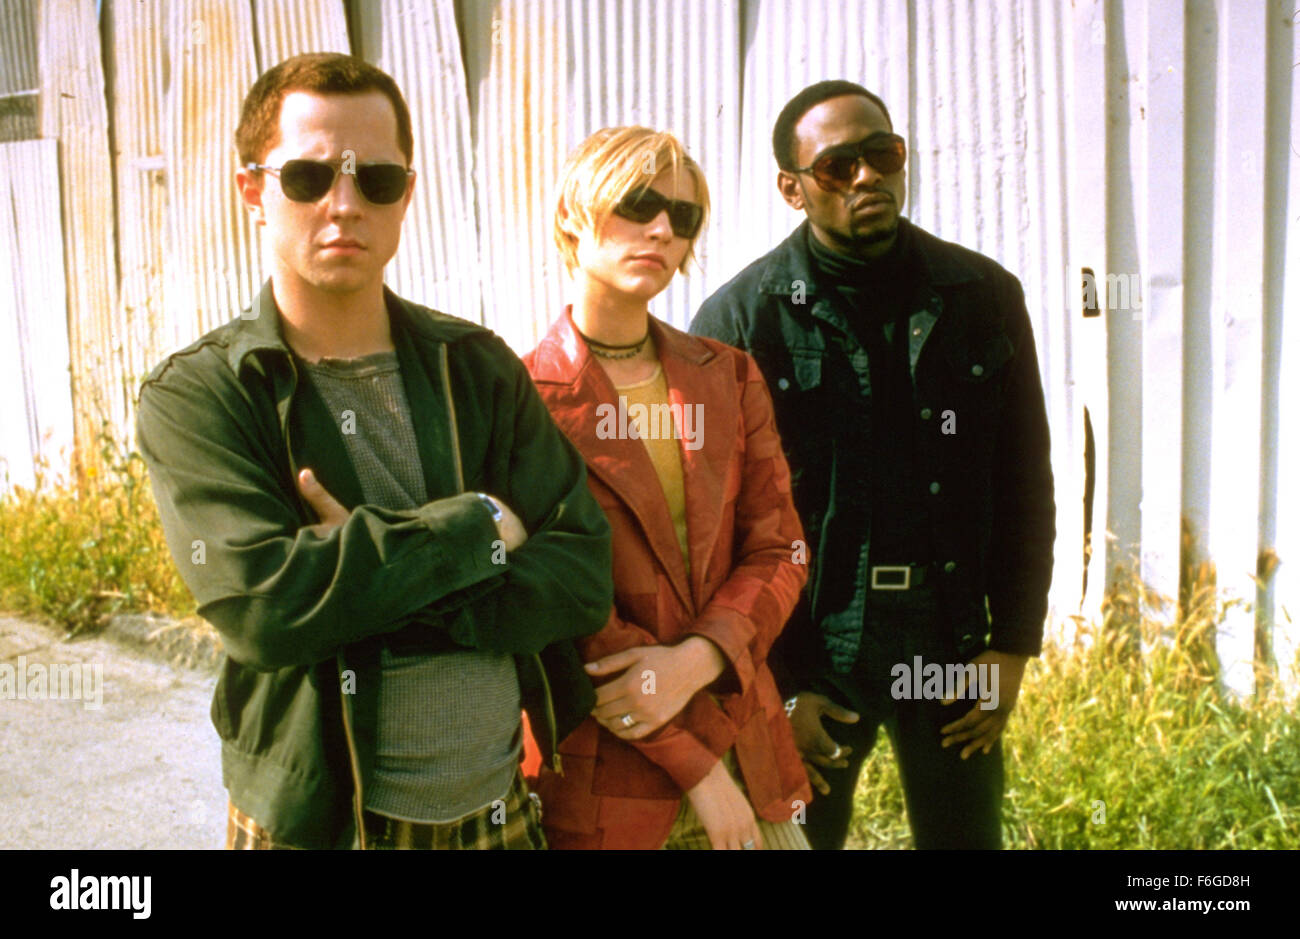 Mar 17, 1999; Los Angeles, CA, USA; (L-R): Actor GIOVANNI RIBISI as Peter, CLAIRE DAINES as Julie and OMAR EPPS as Lincoln in the Scott Siler directed action thriller, 'The Mod Squad.' Stock Photo